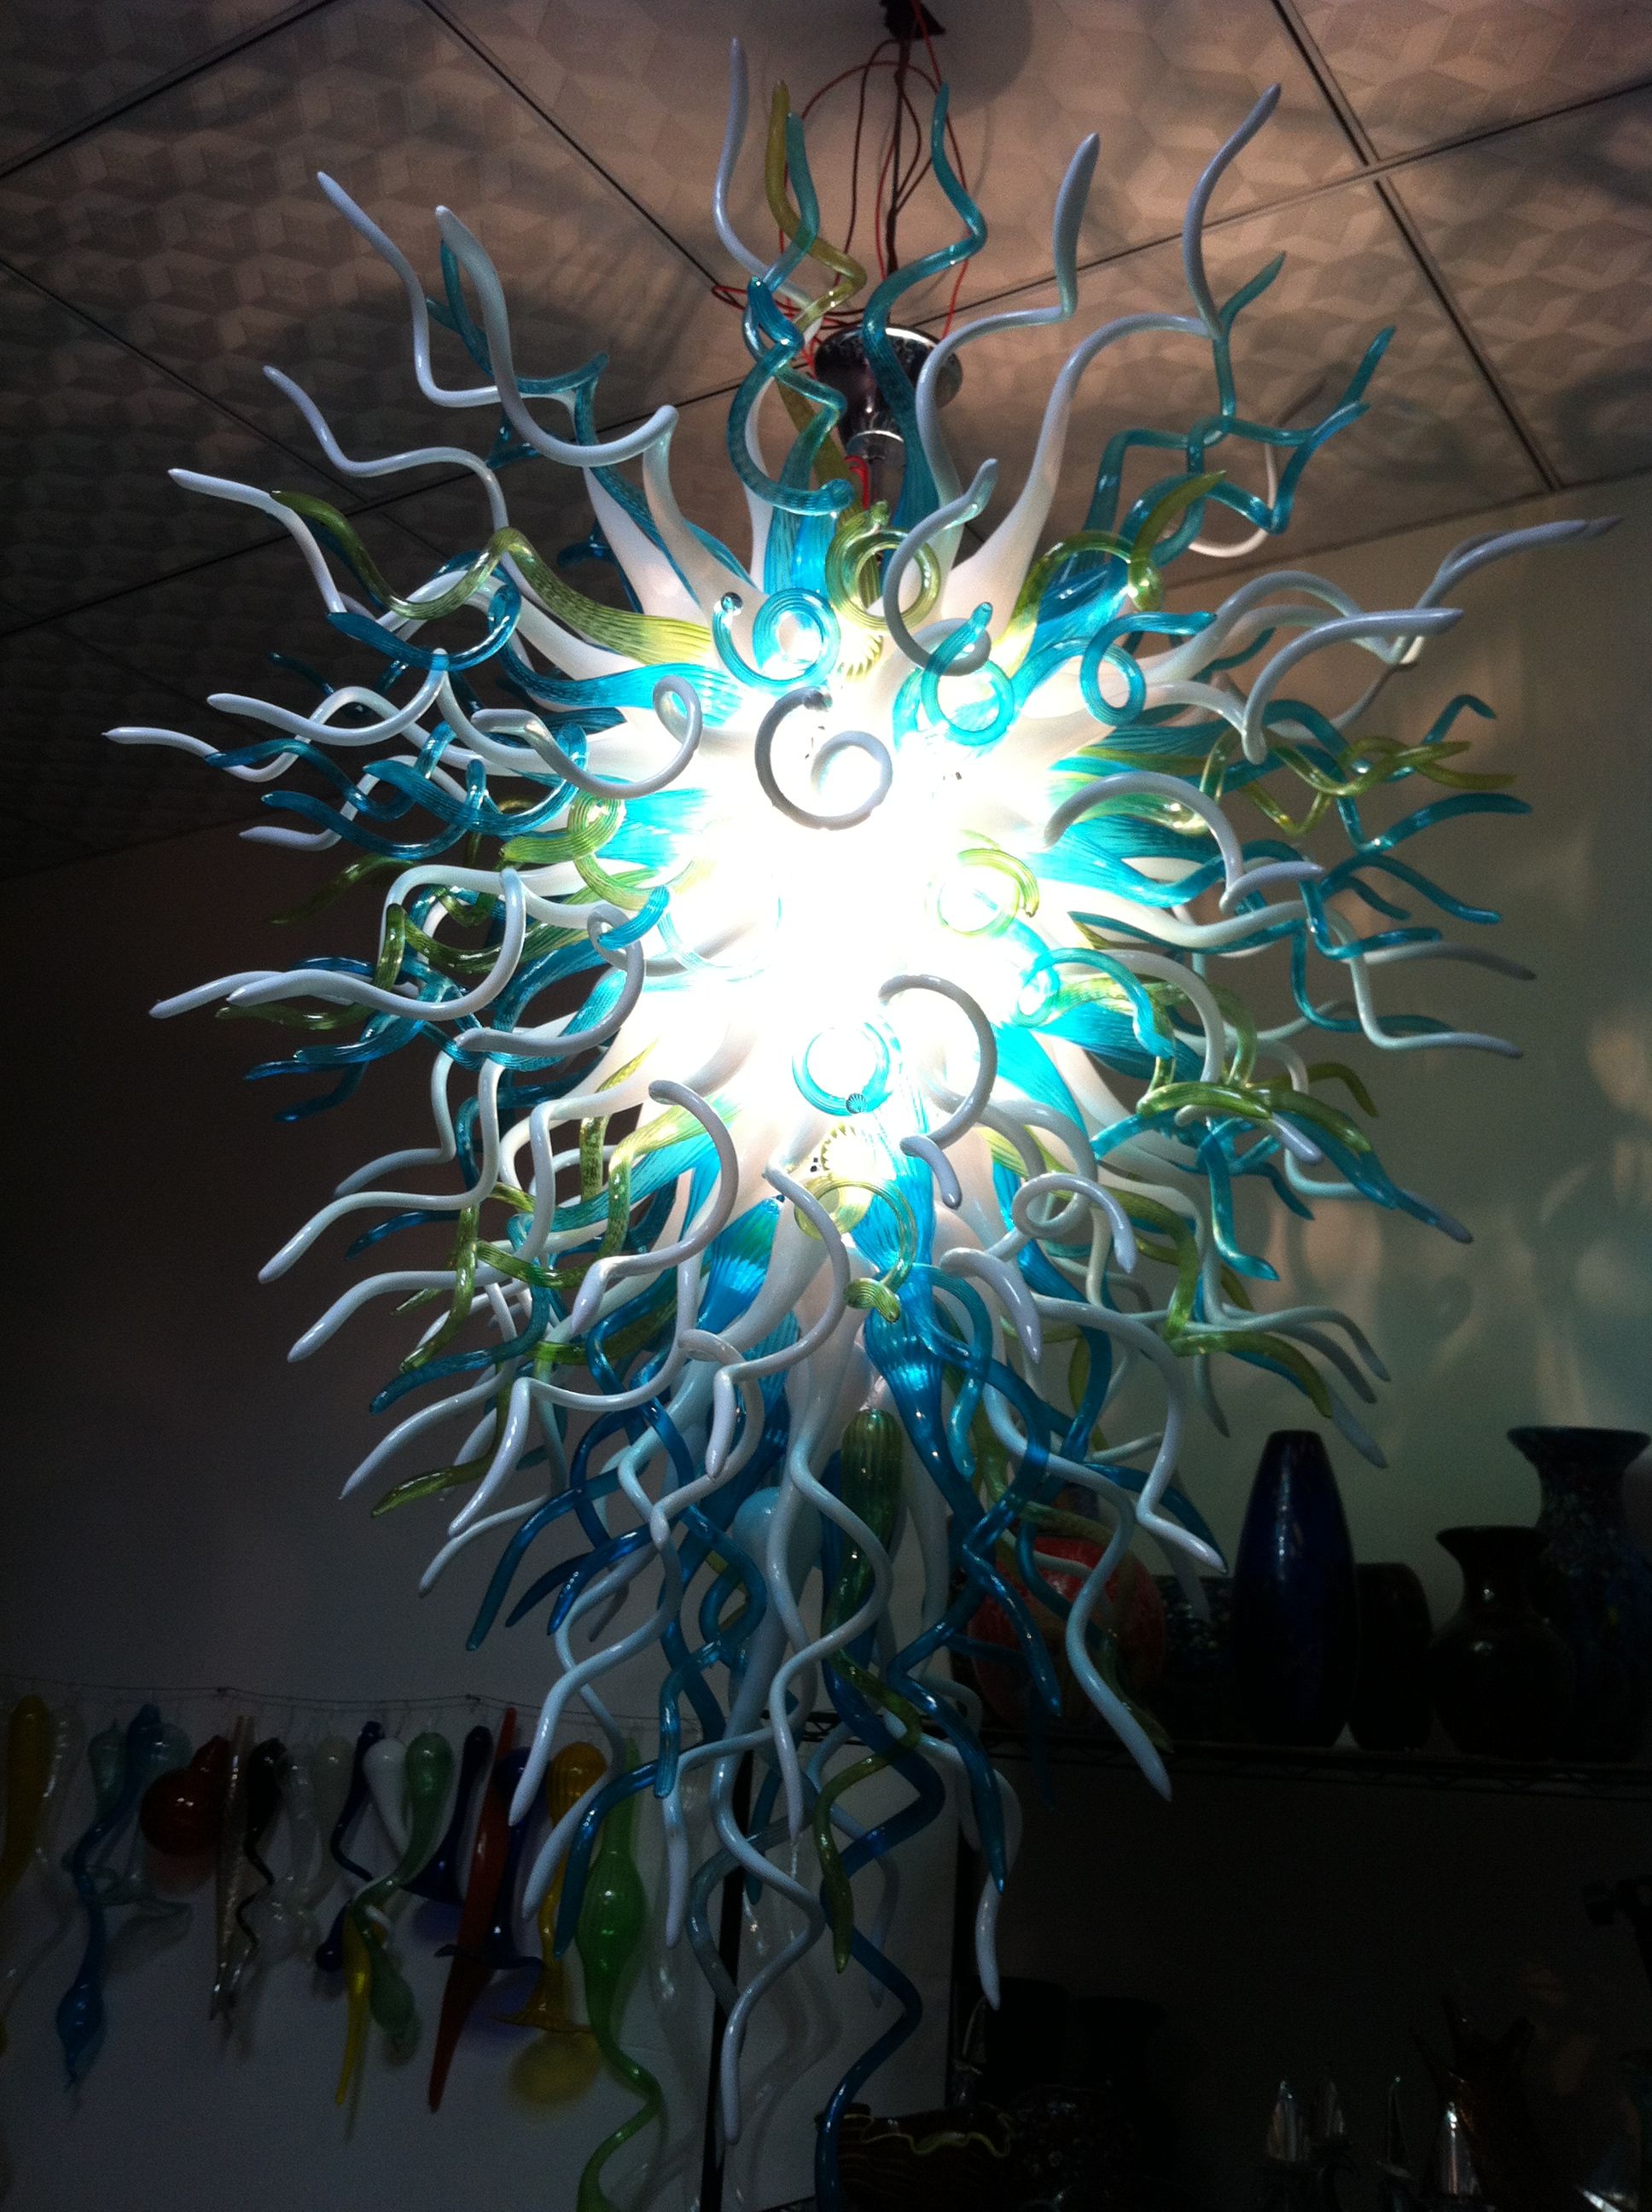 ac-dc-led-lamp-ce-ul-certificate-chihuly.jpg